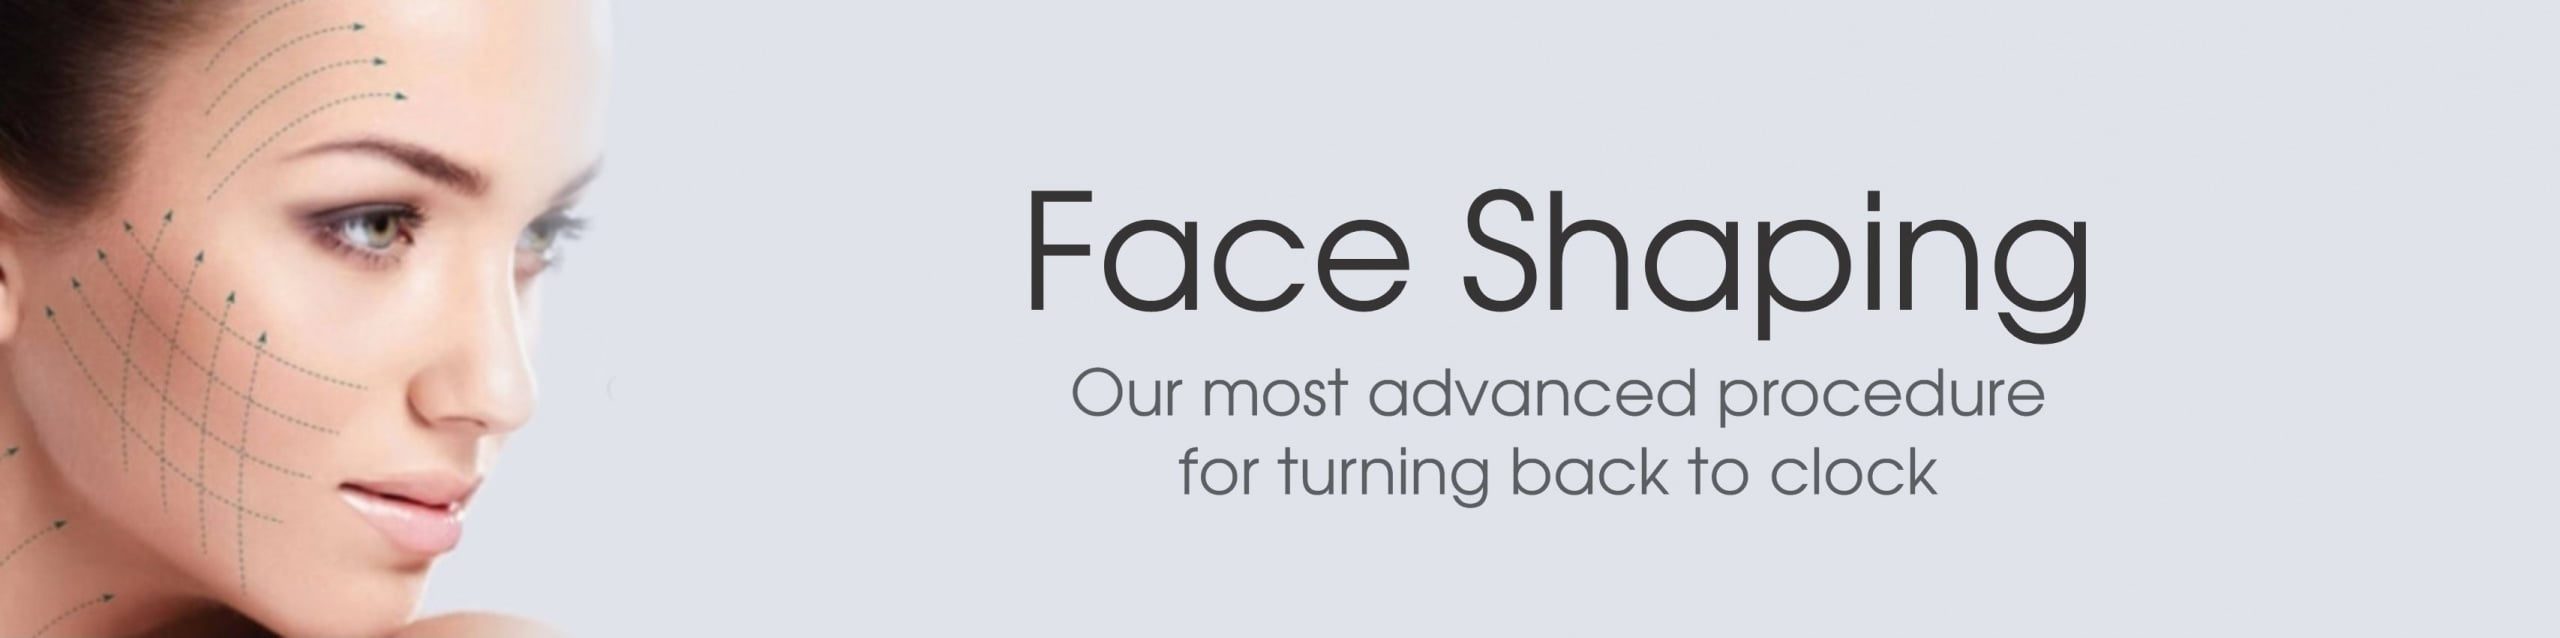 Face Shaping